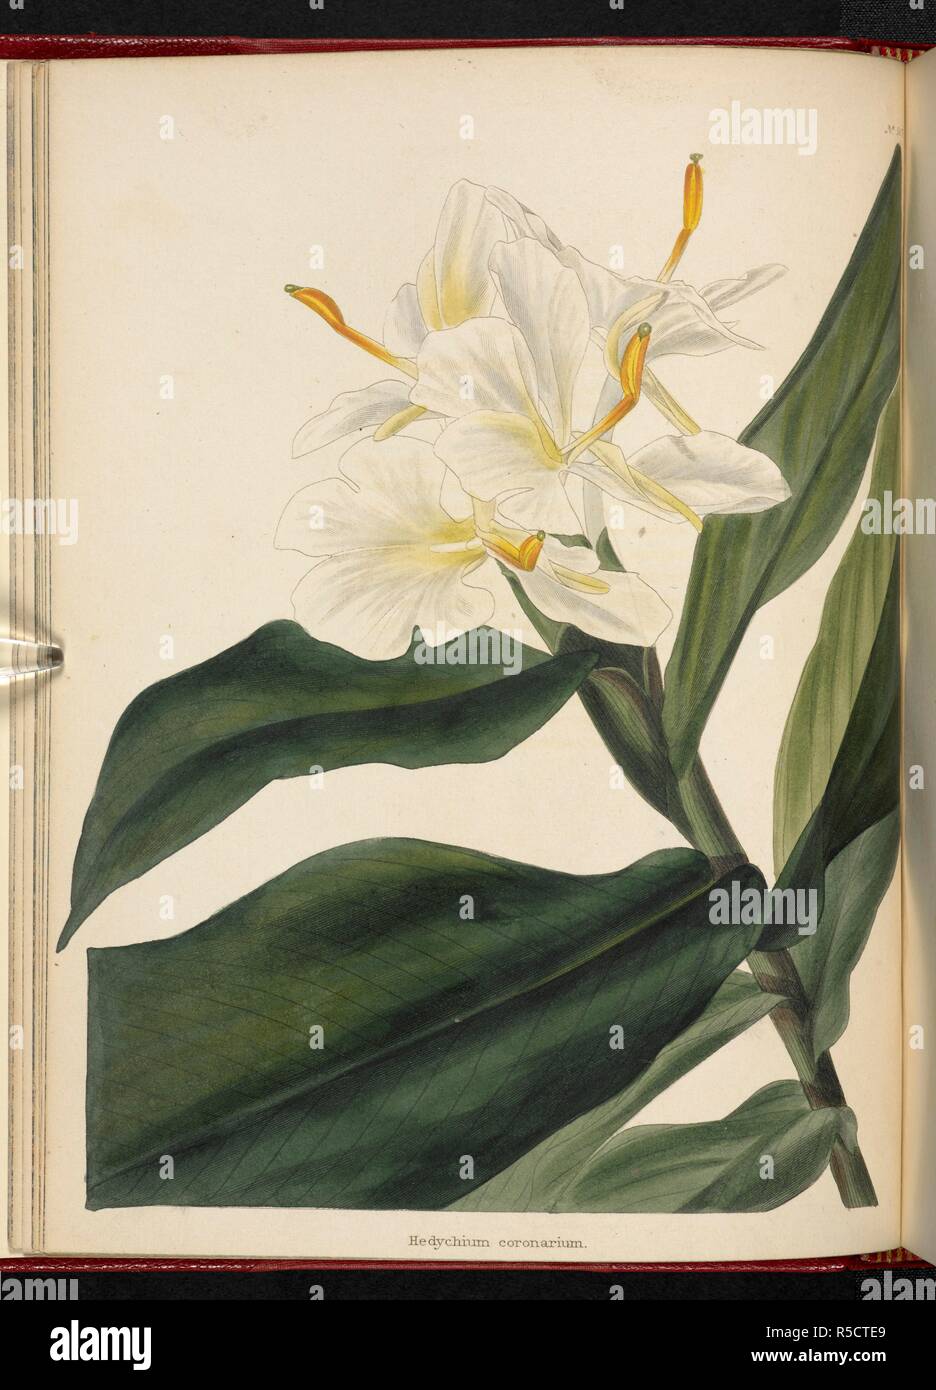 Hedychium coronarium. The Botanical Cabinet, consisting of coloured delineations of plants, from all countries, with a short account of each, etc. By C. Loddiges and Sons ... The plates by G. Cooke. vol. 1-20. London, 1817-33. Source: 443.b.10, vol.6, no.507. Author: Cooke, George. Stock Photo